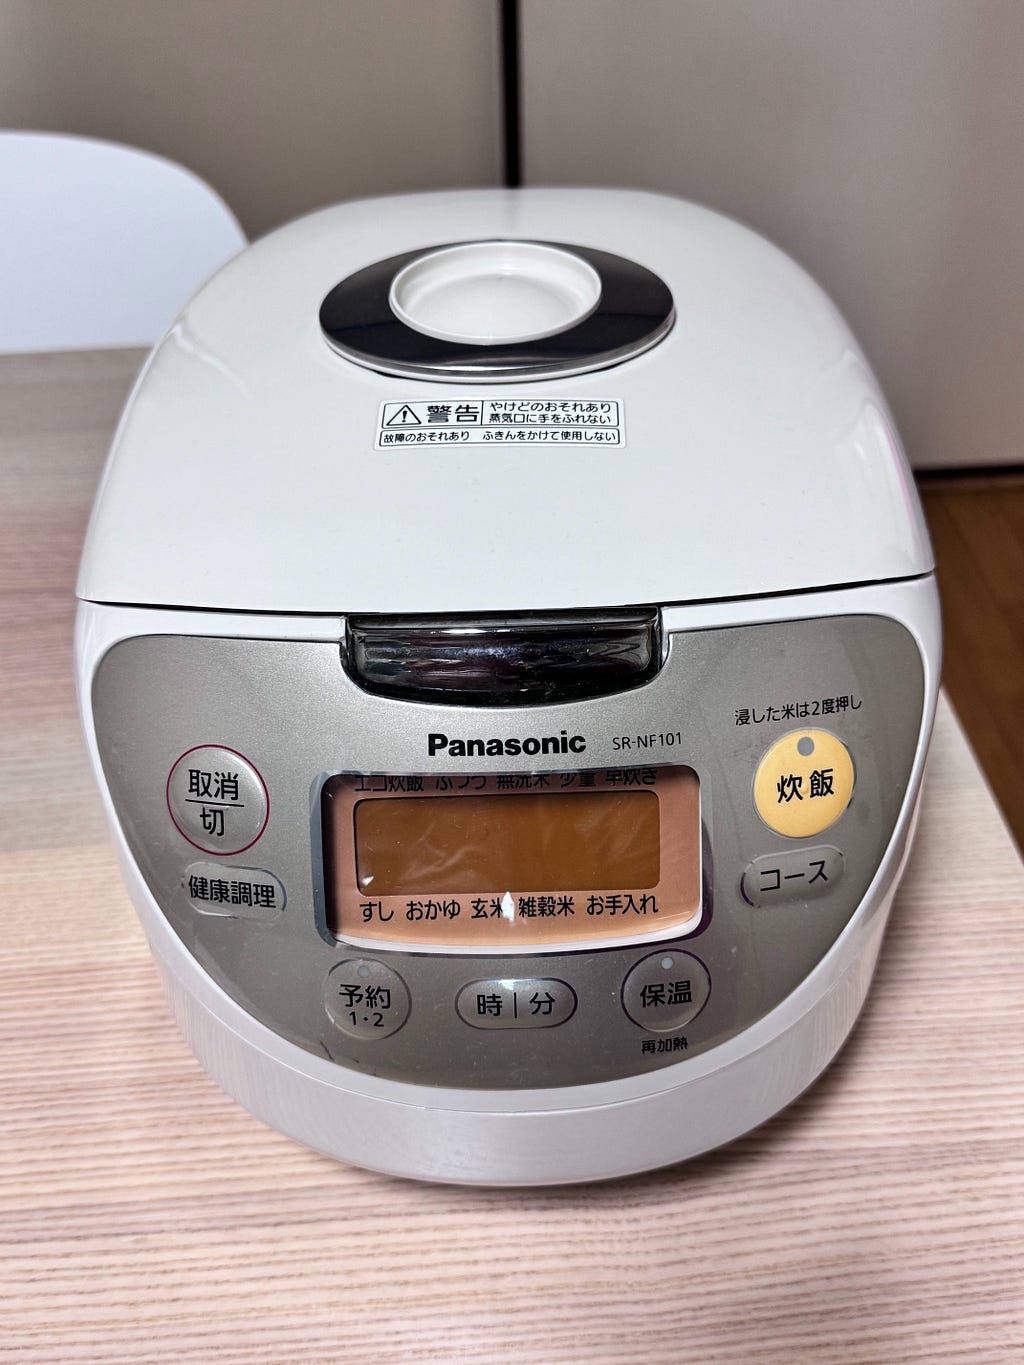 Japanese rice cooker appliance